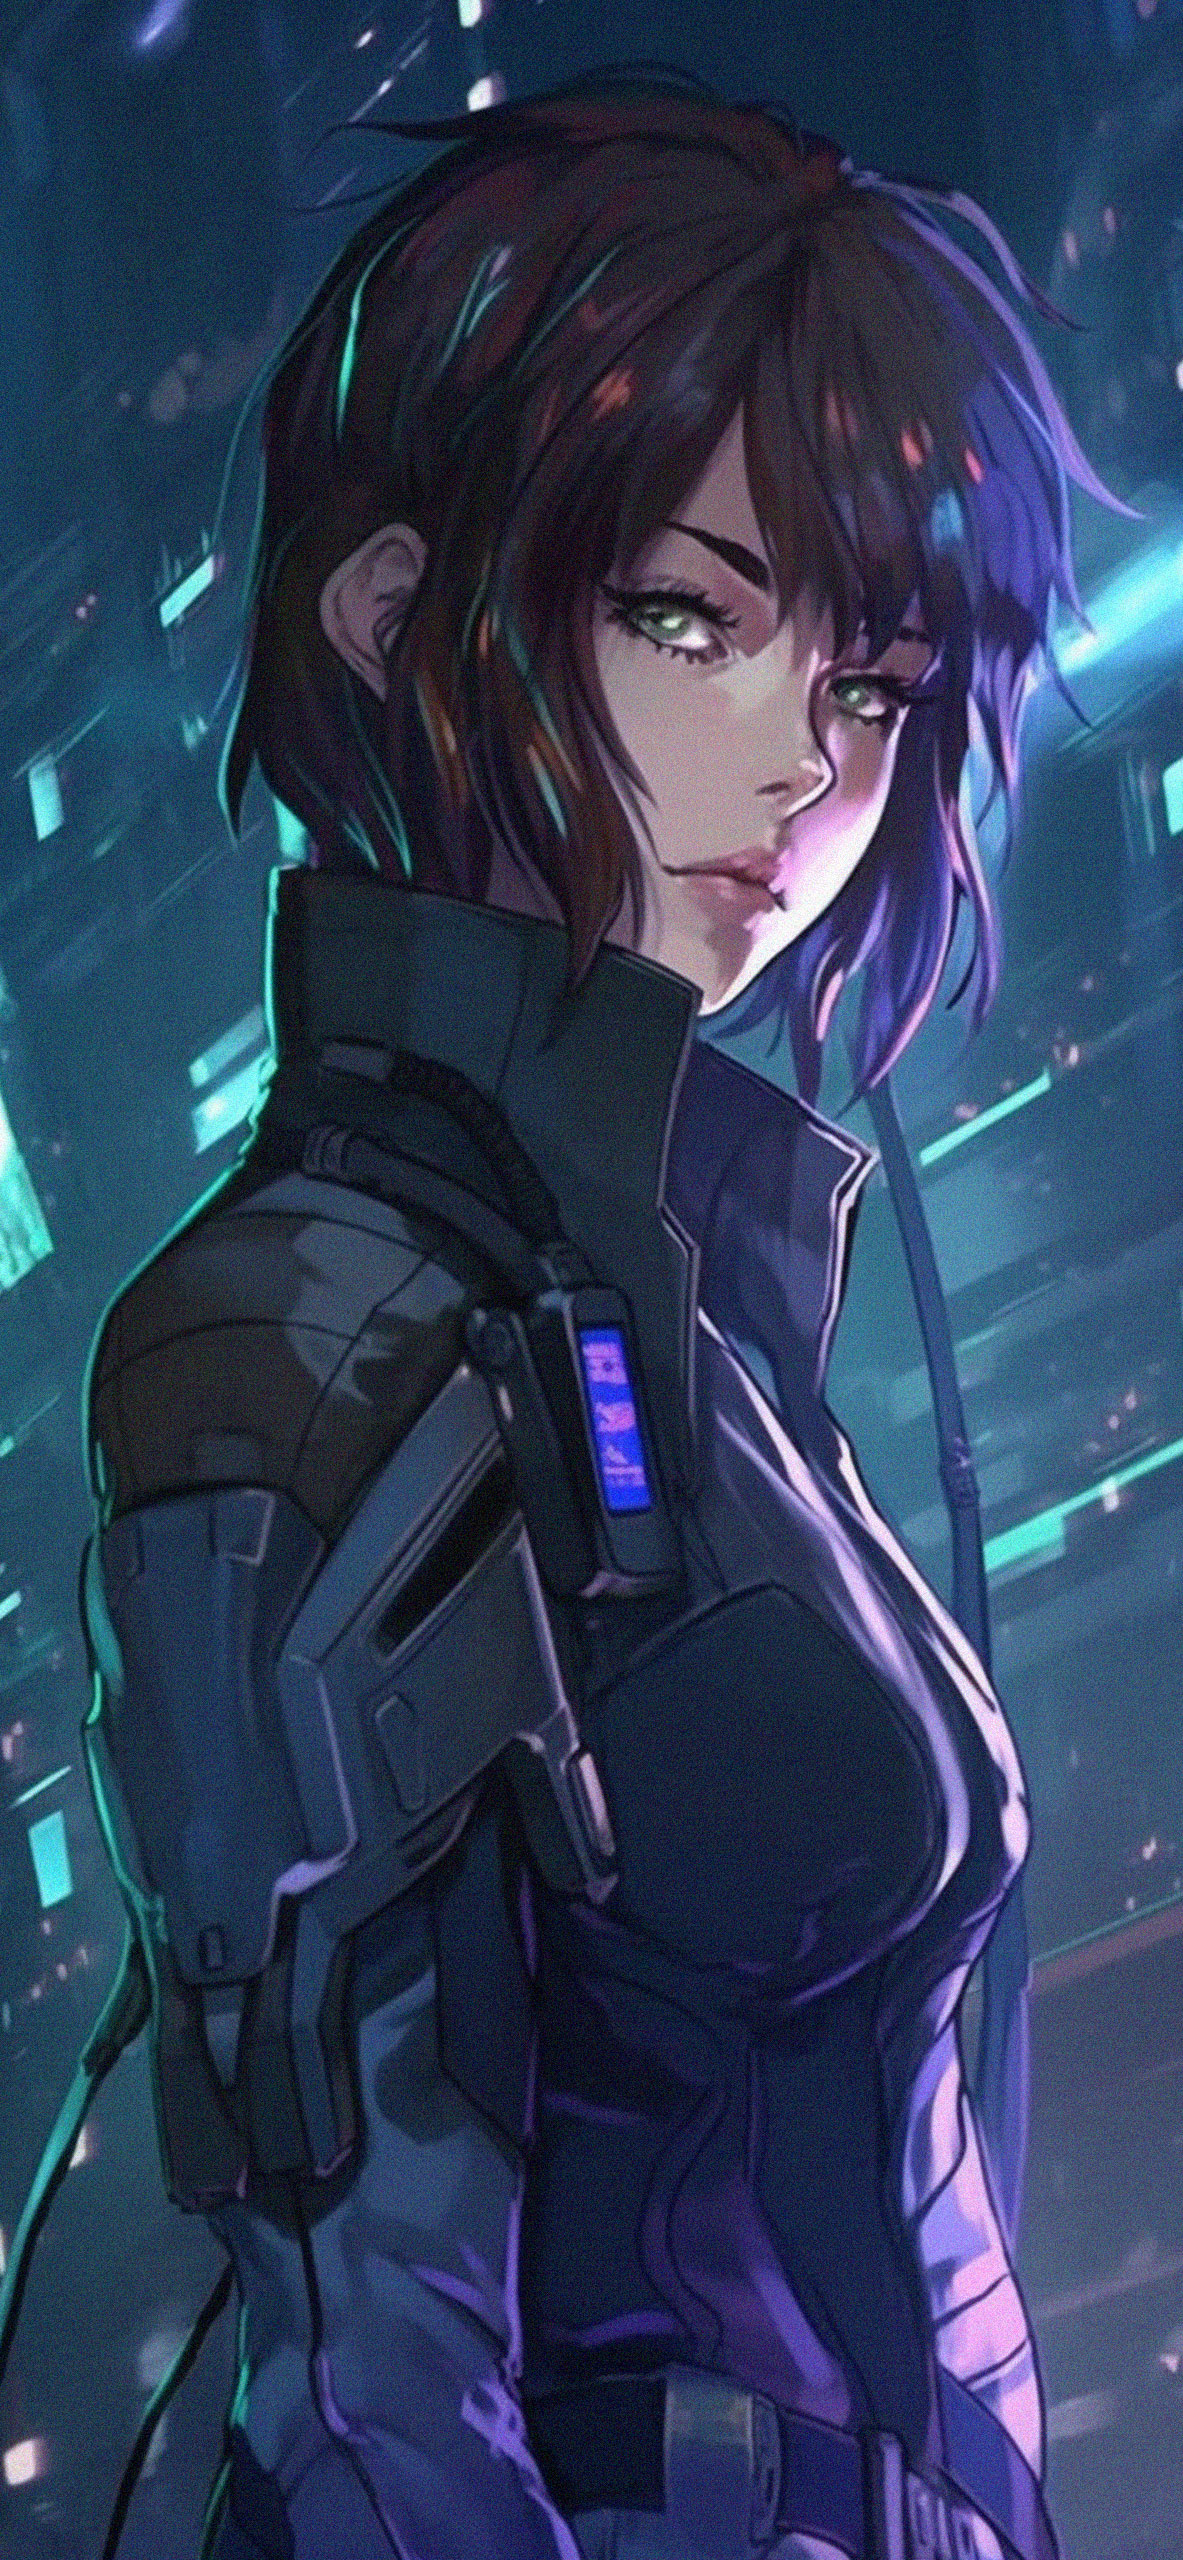 prompthunt: beautiful cyberpunk anime style illustration of motoko kusanagi  seen in a tech labor with her back open showing a complex mess of cables  and wires, by masamune shirow and katsushiro otomo,